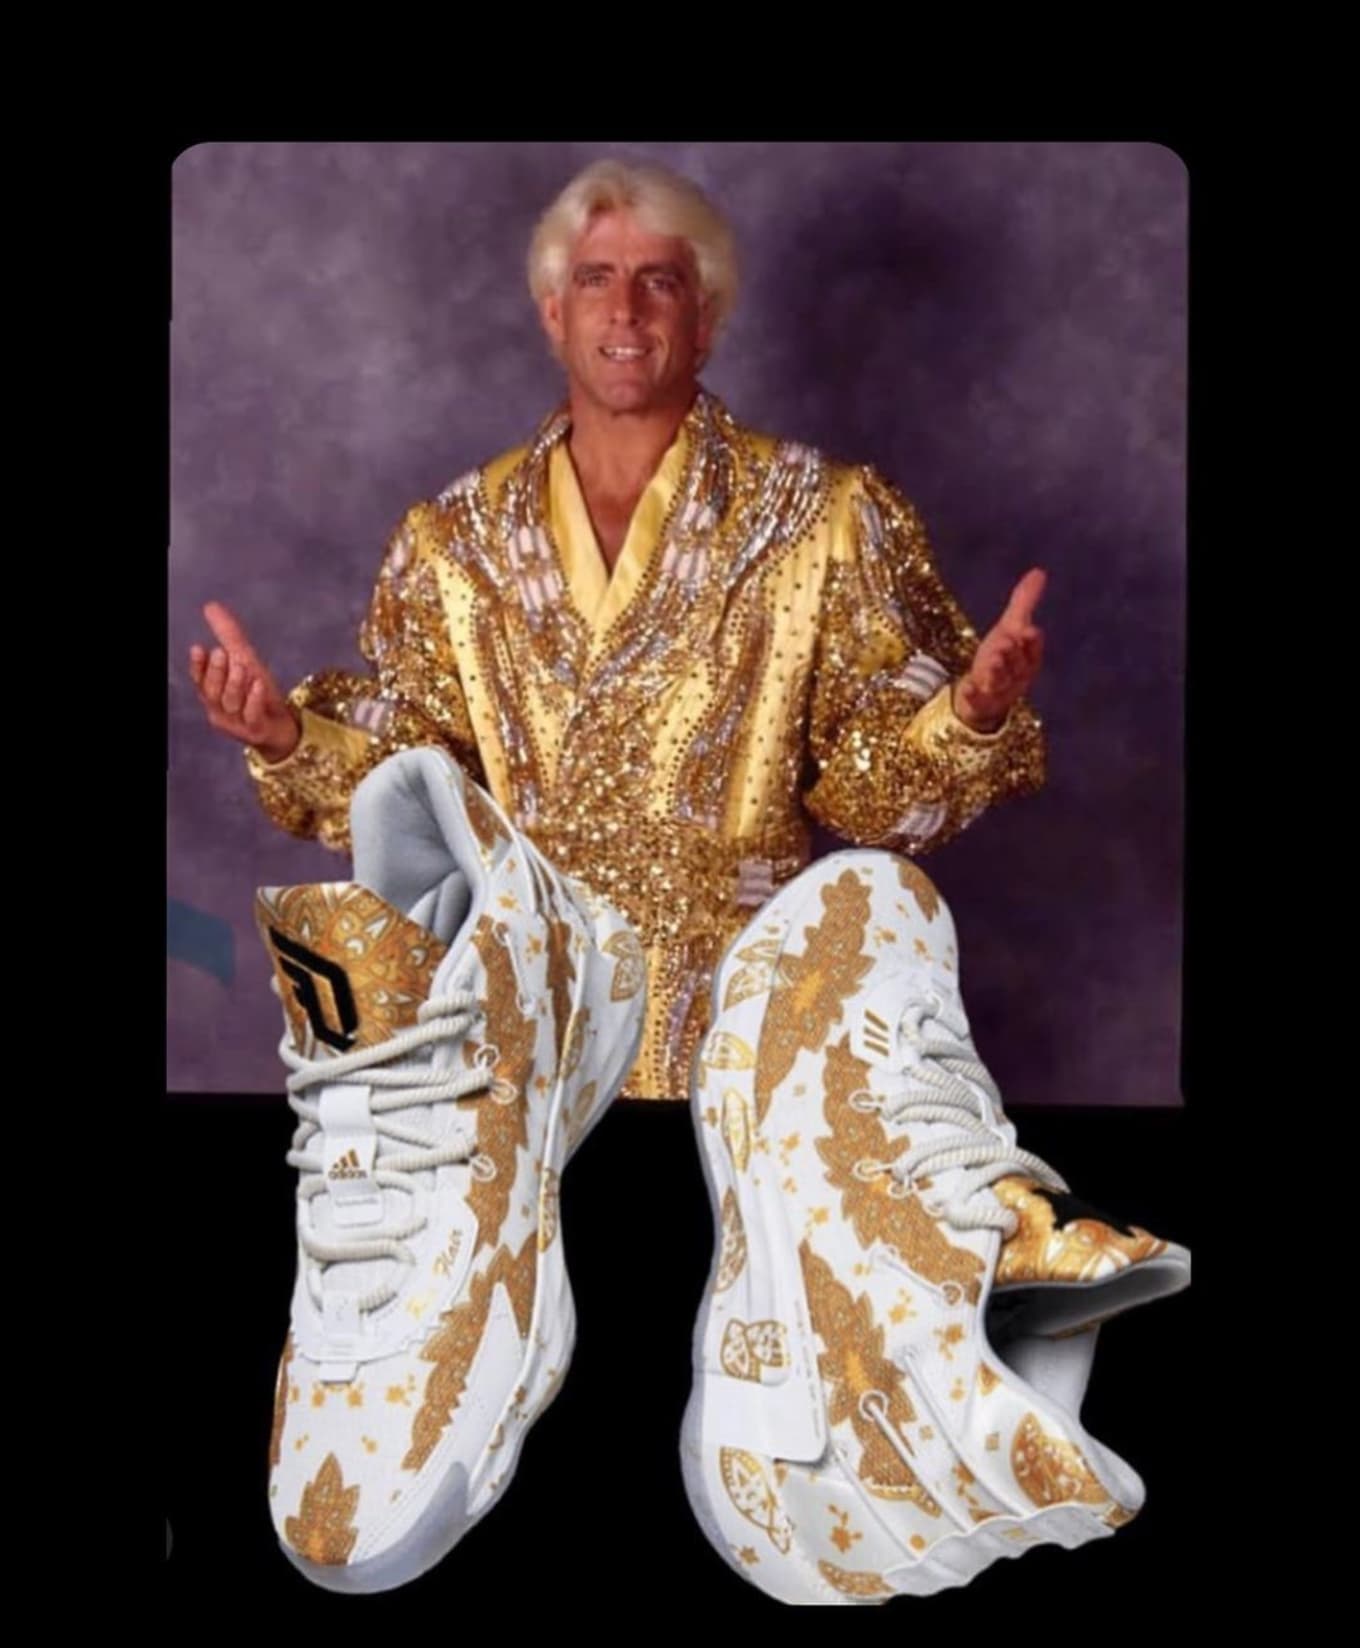 Adidas Dame 7 'Ric Flair' Release Date 